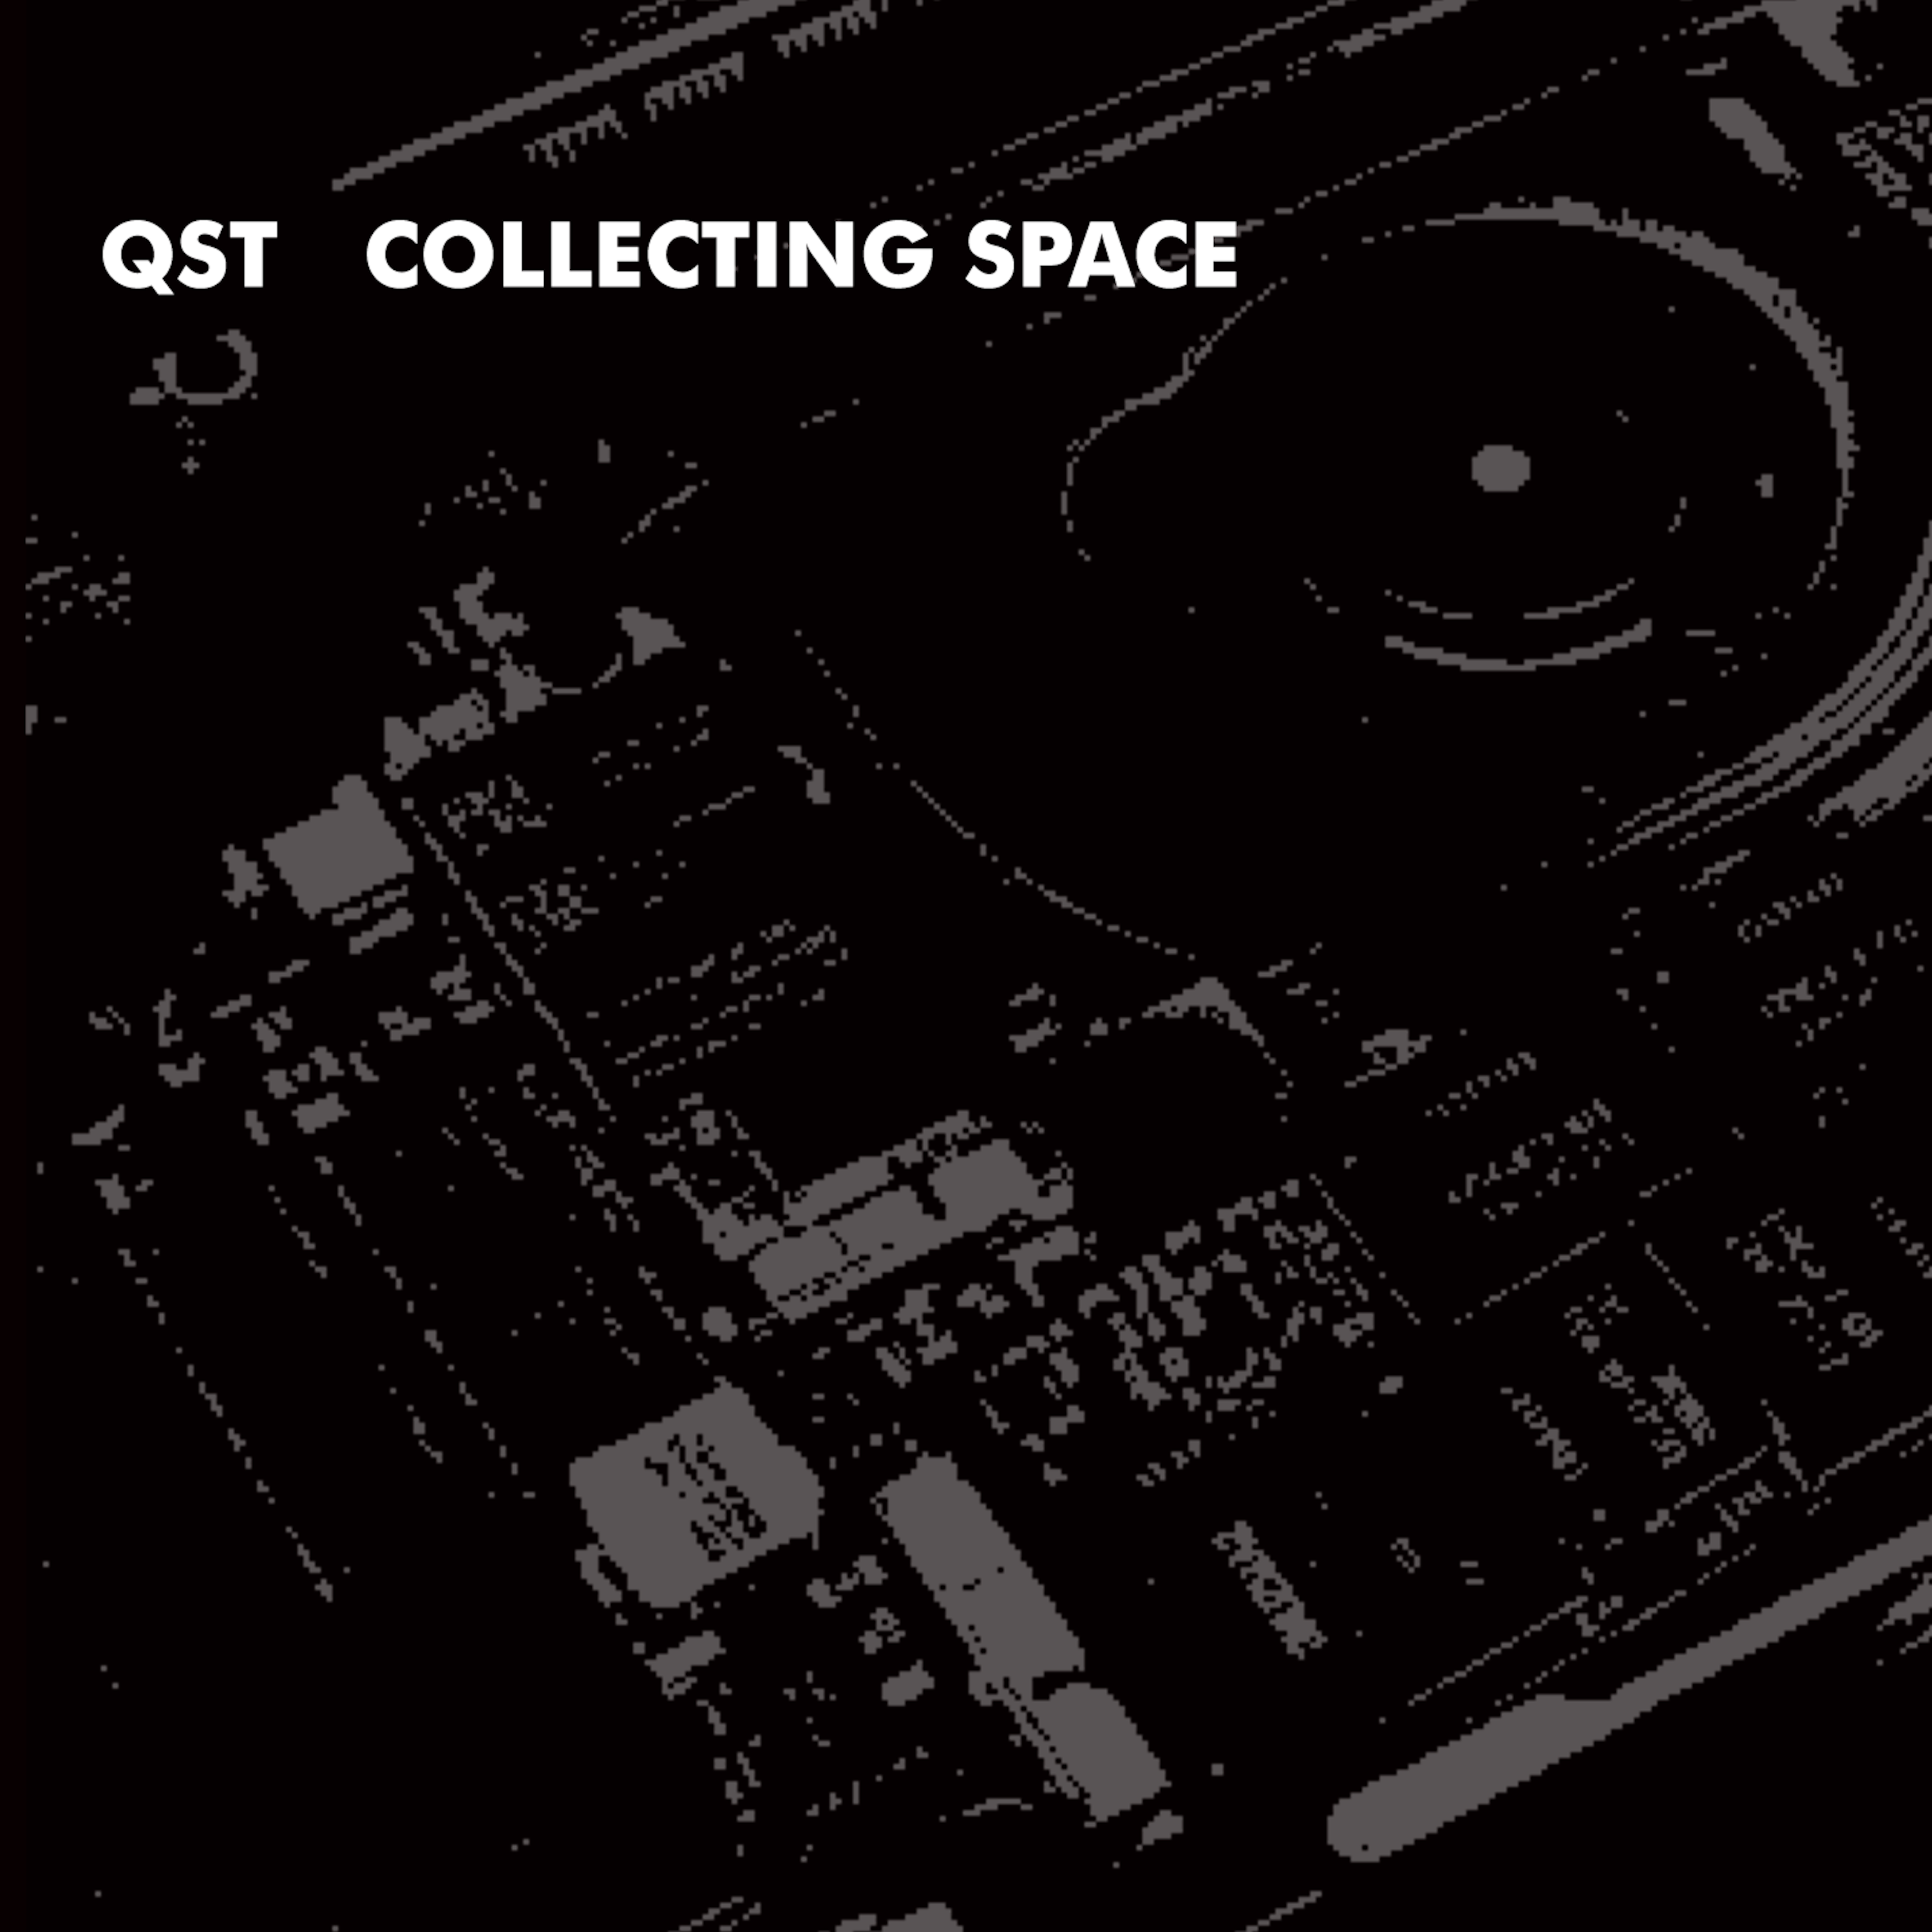 QST - Collecting Space